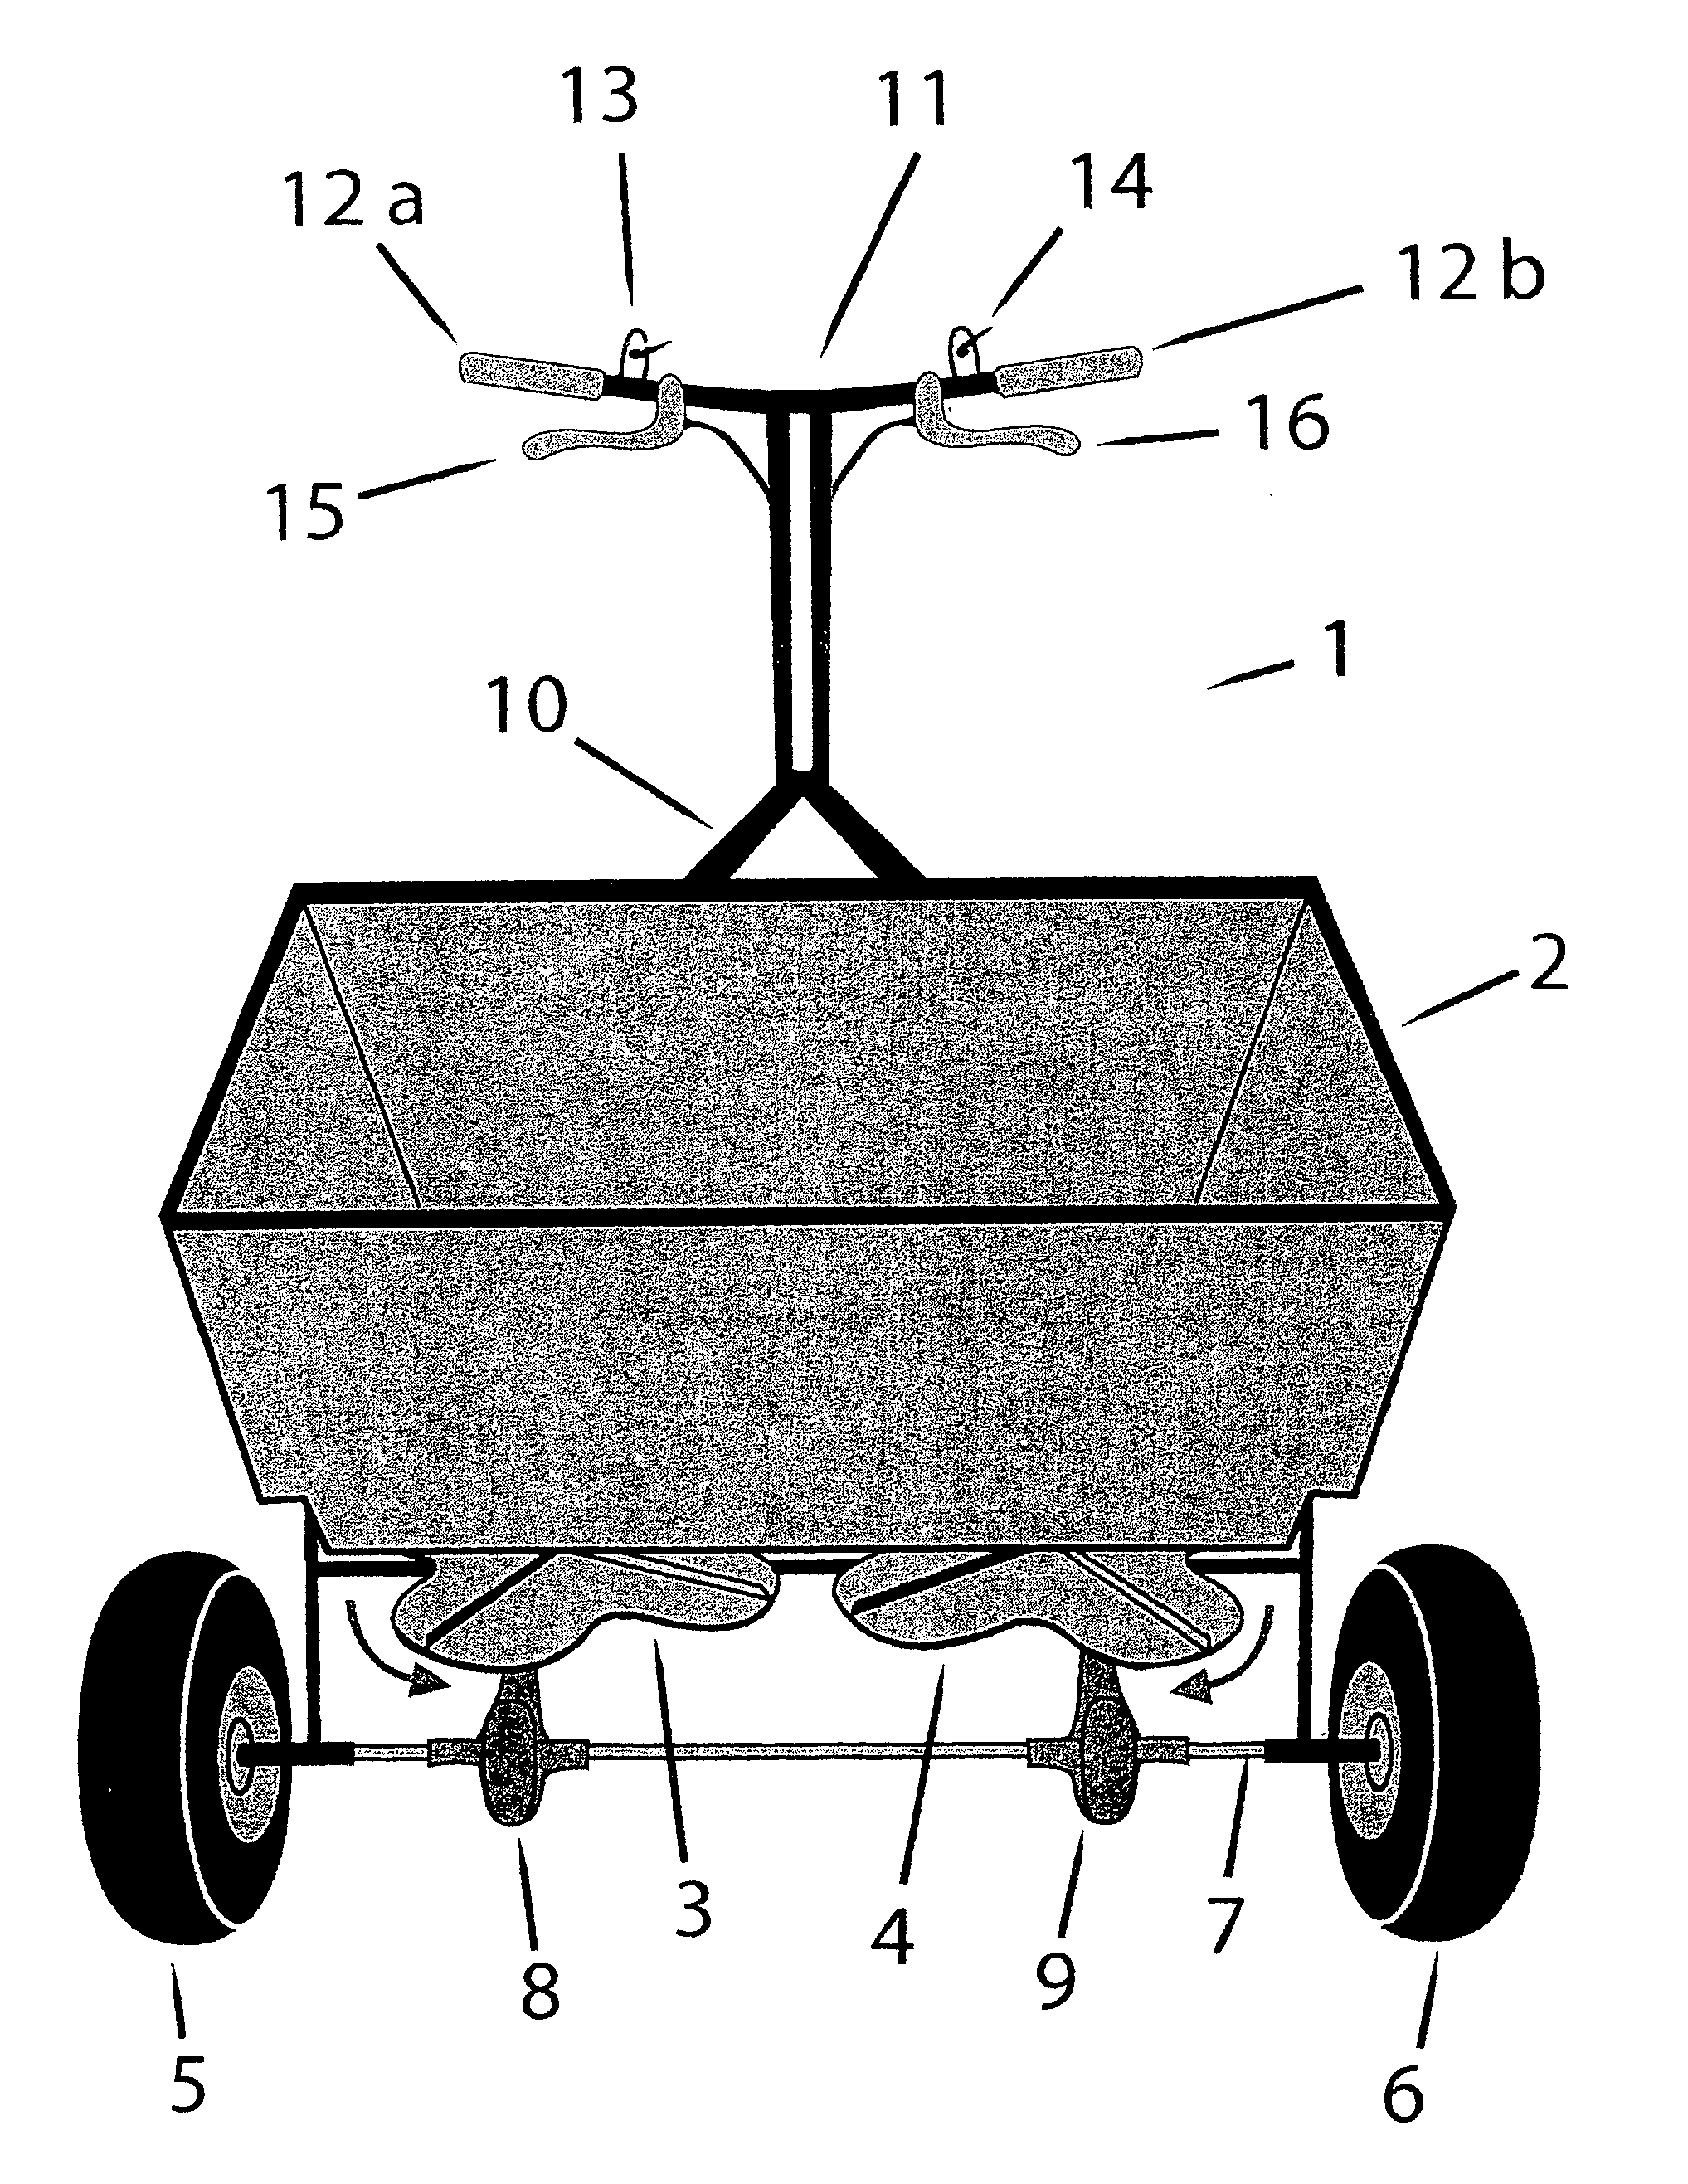 Spreader with two rotatable plates